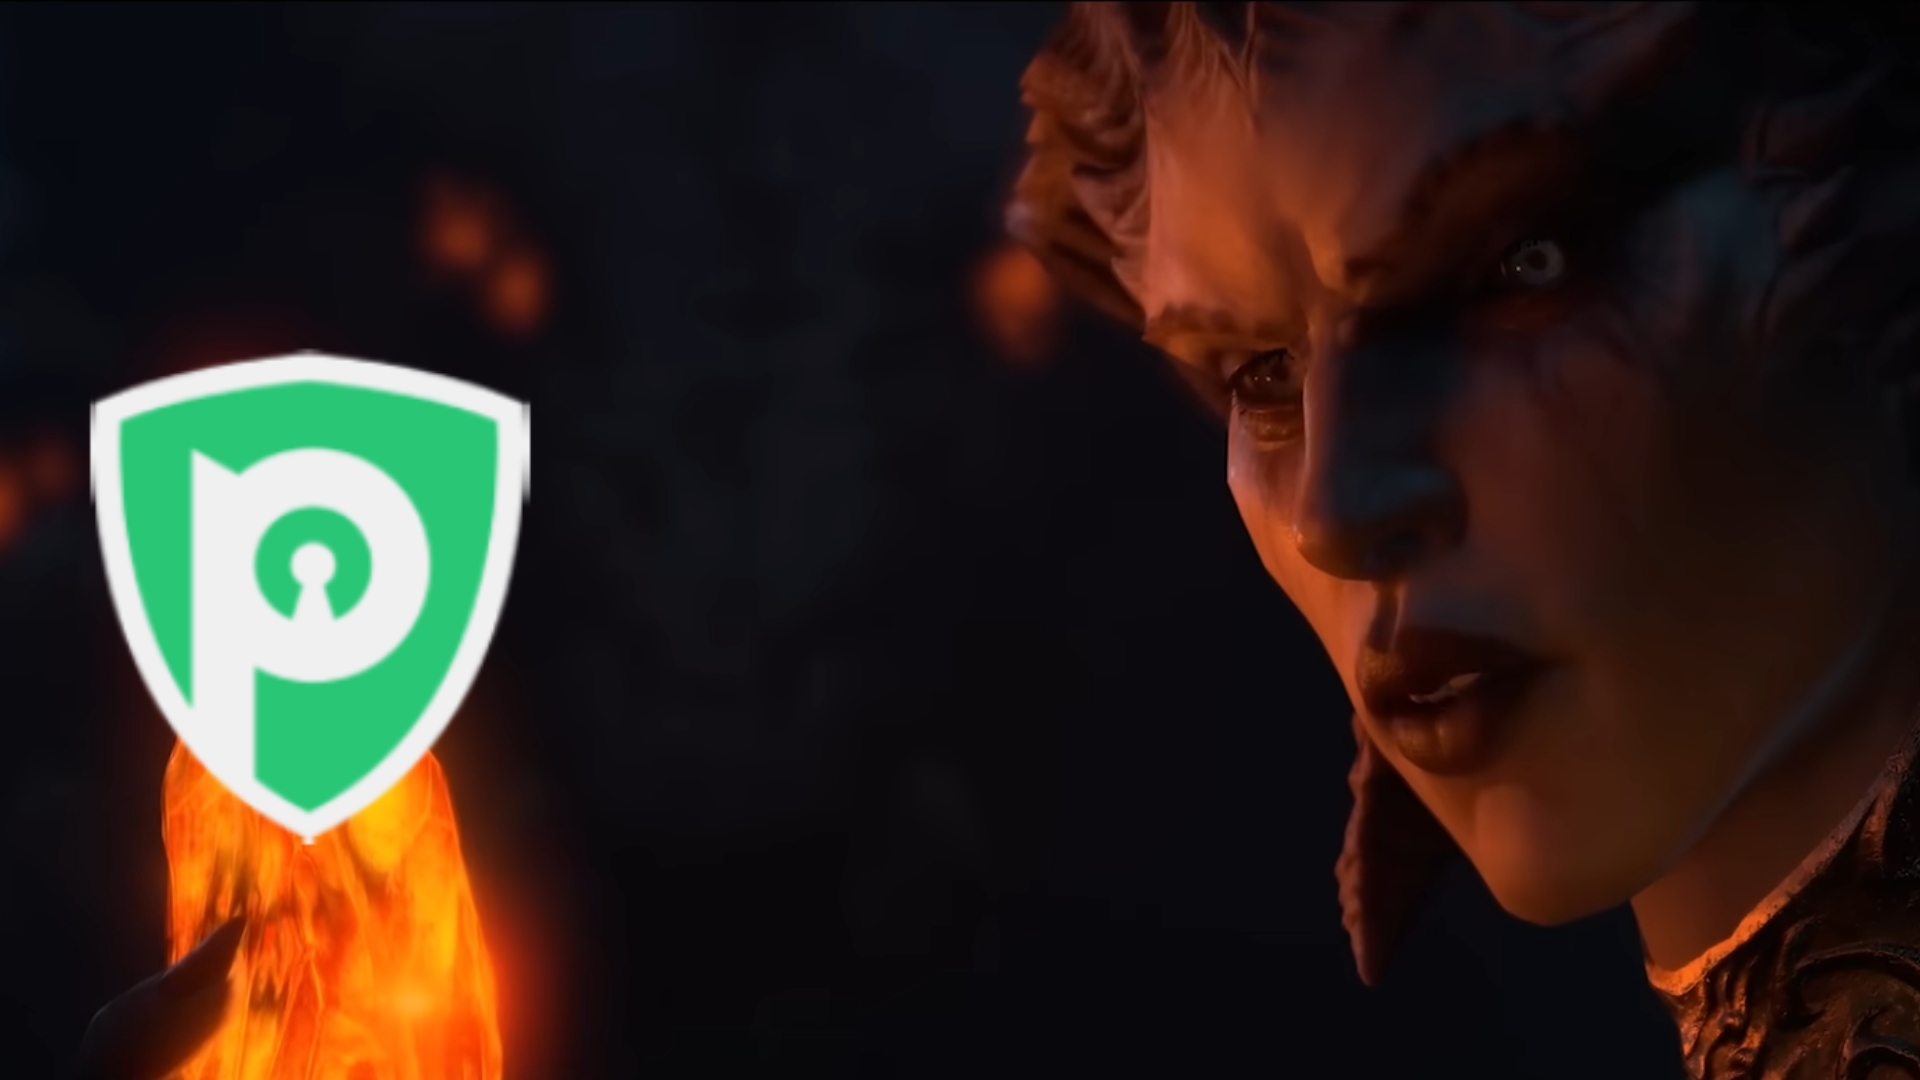 Best Diablo 4 VPN: PureVPN. Image shows Lilith holding a crystal with the PureVPN logo on it.